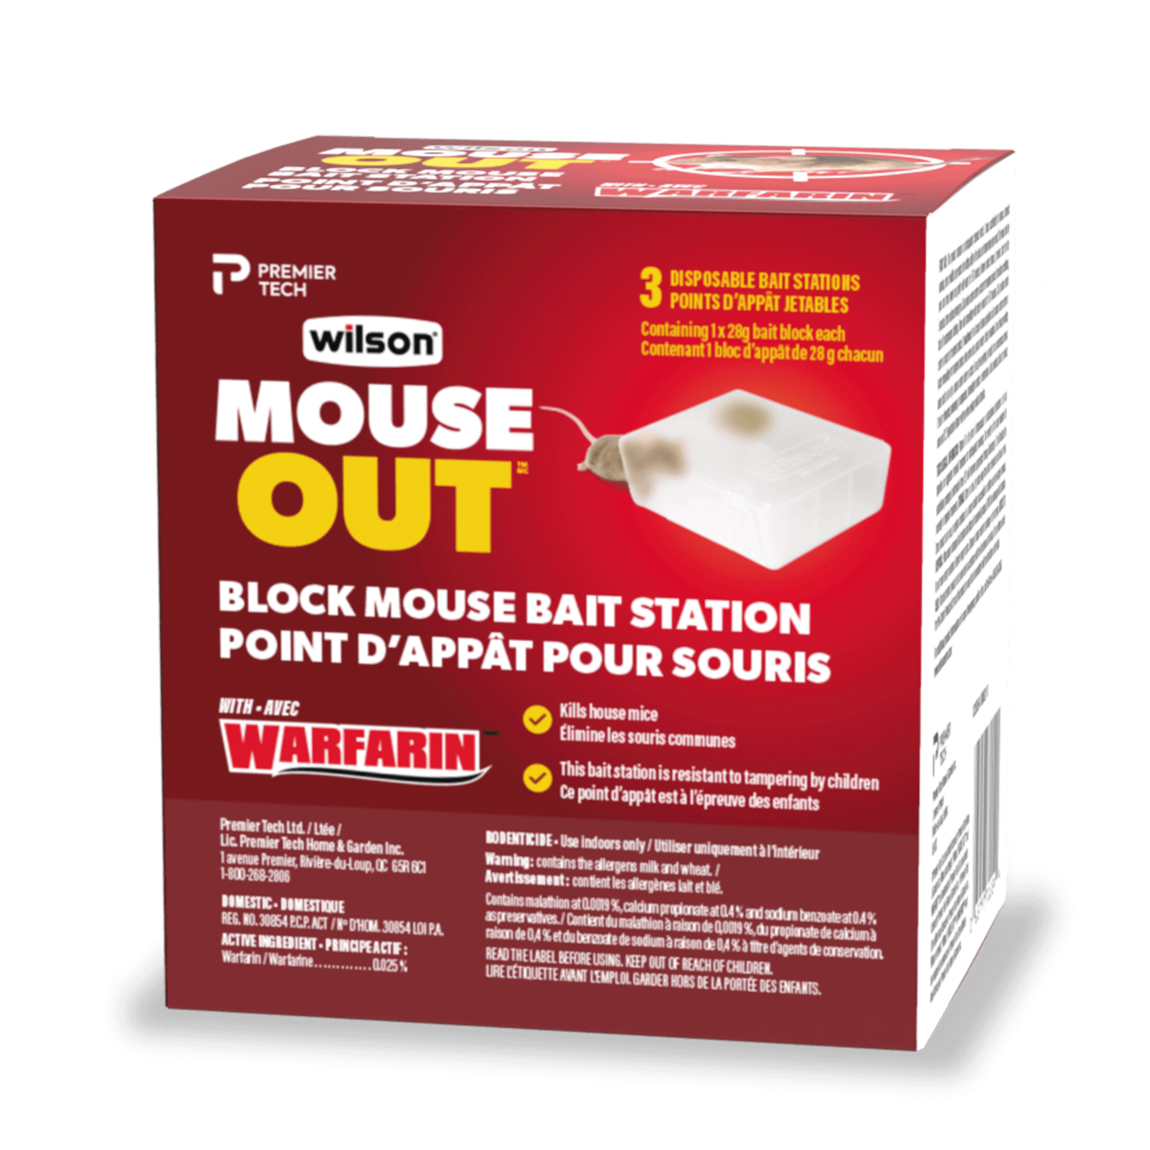 https://www.wilsoncontrol.com/sites/ptgc_wilson/files/styles/swiper_gallery_image/public/2022-01/wilson-mouse-out-block-mouse-bait-station-with-warfarin-3traps.png?itok=FIwHig2c